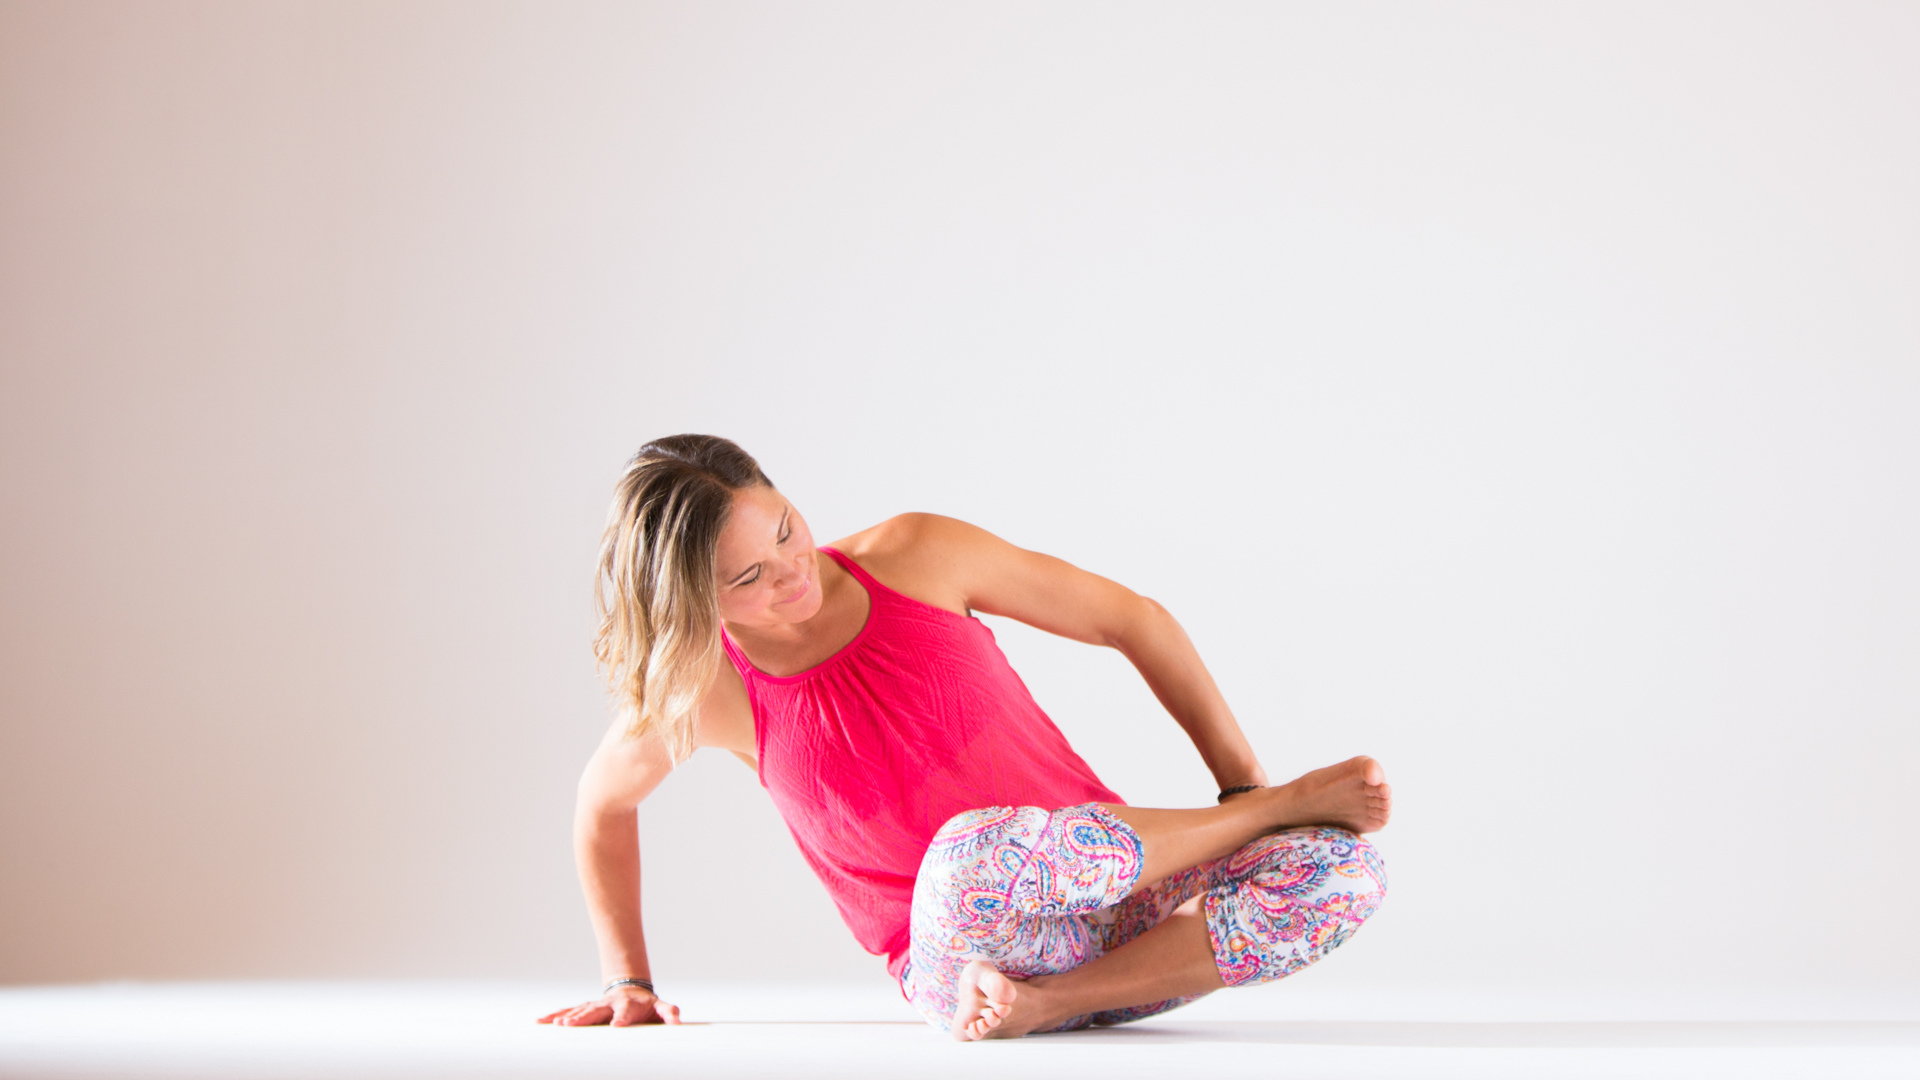 Yoga For Beginners: Supine Pigeon Pose - Variation on the 